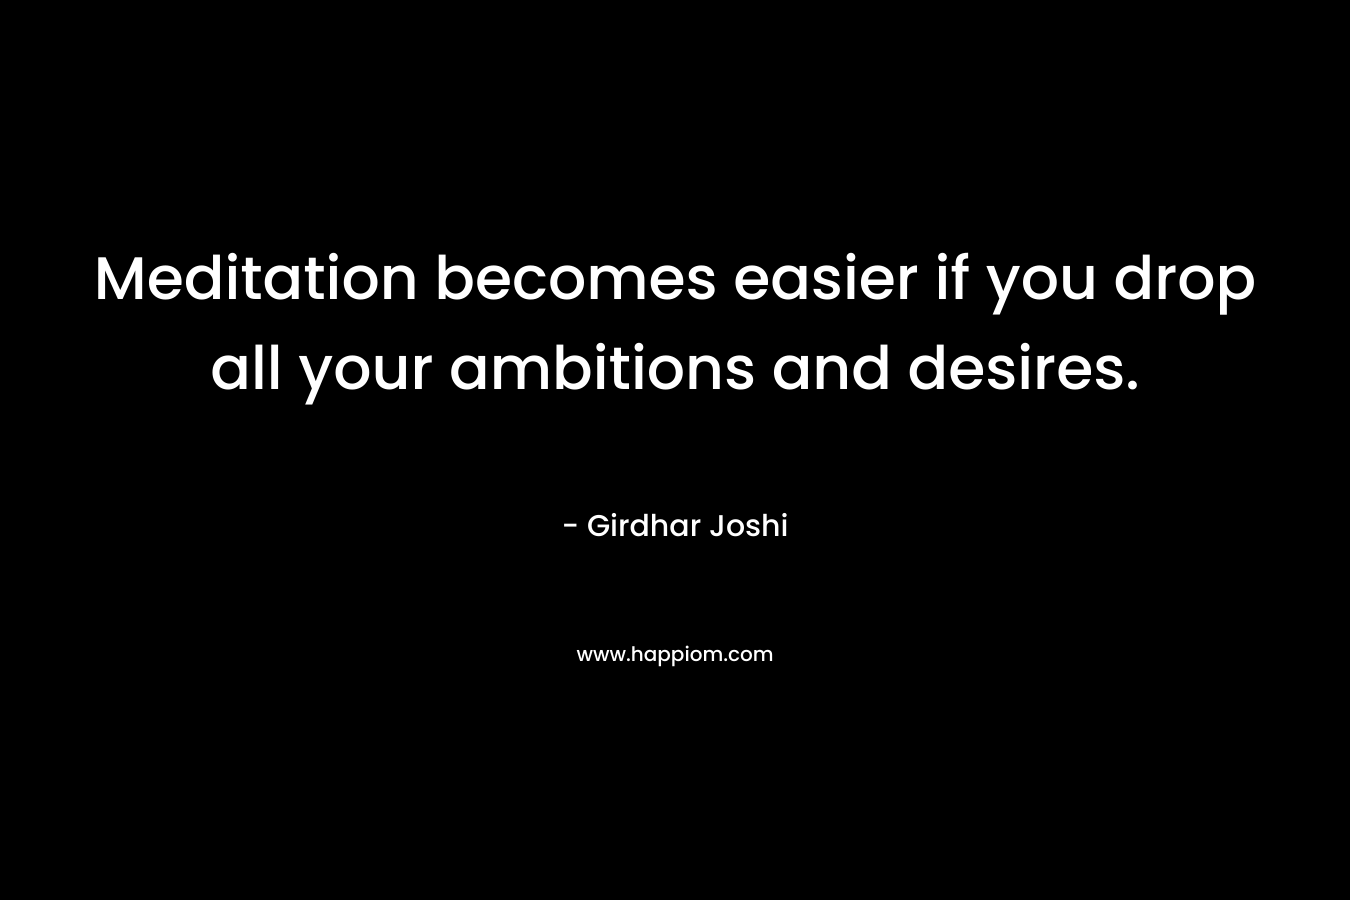 Meditation becomes easier if you drop all your ambitions and desires.